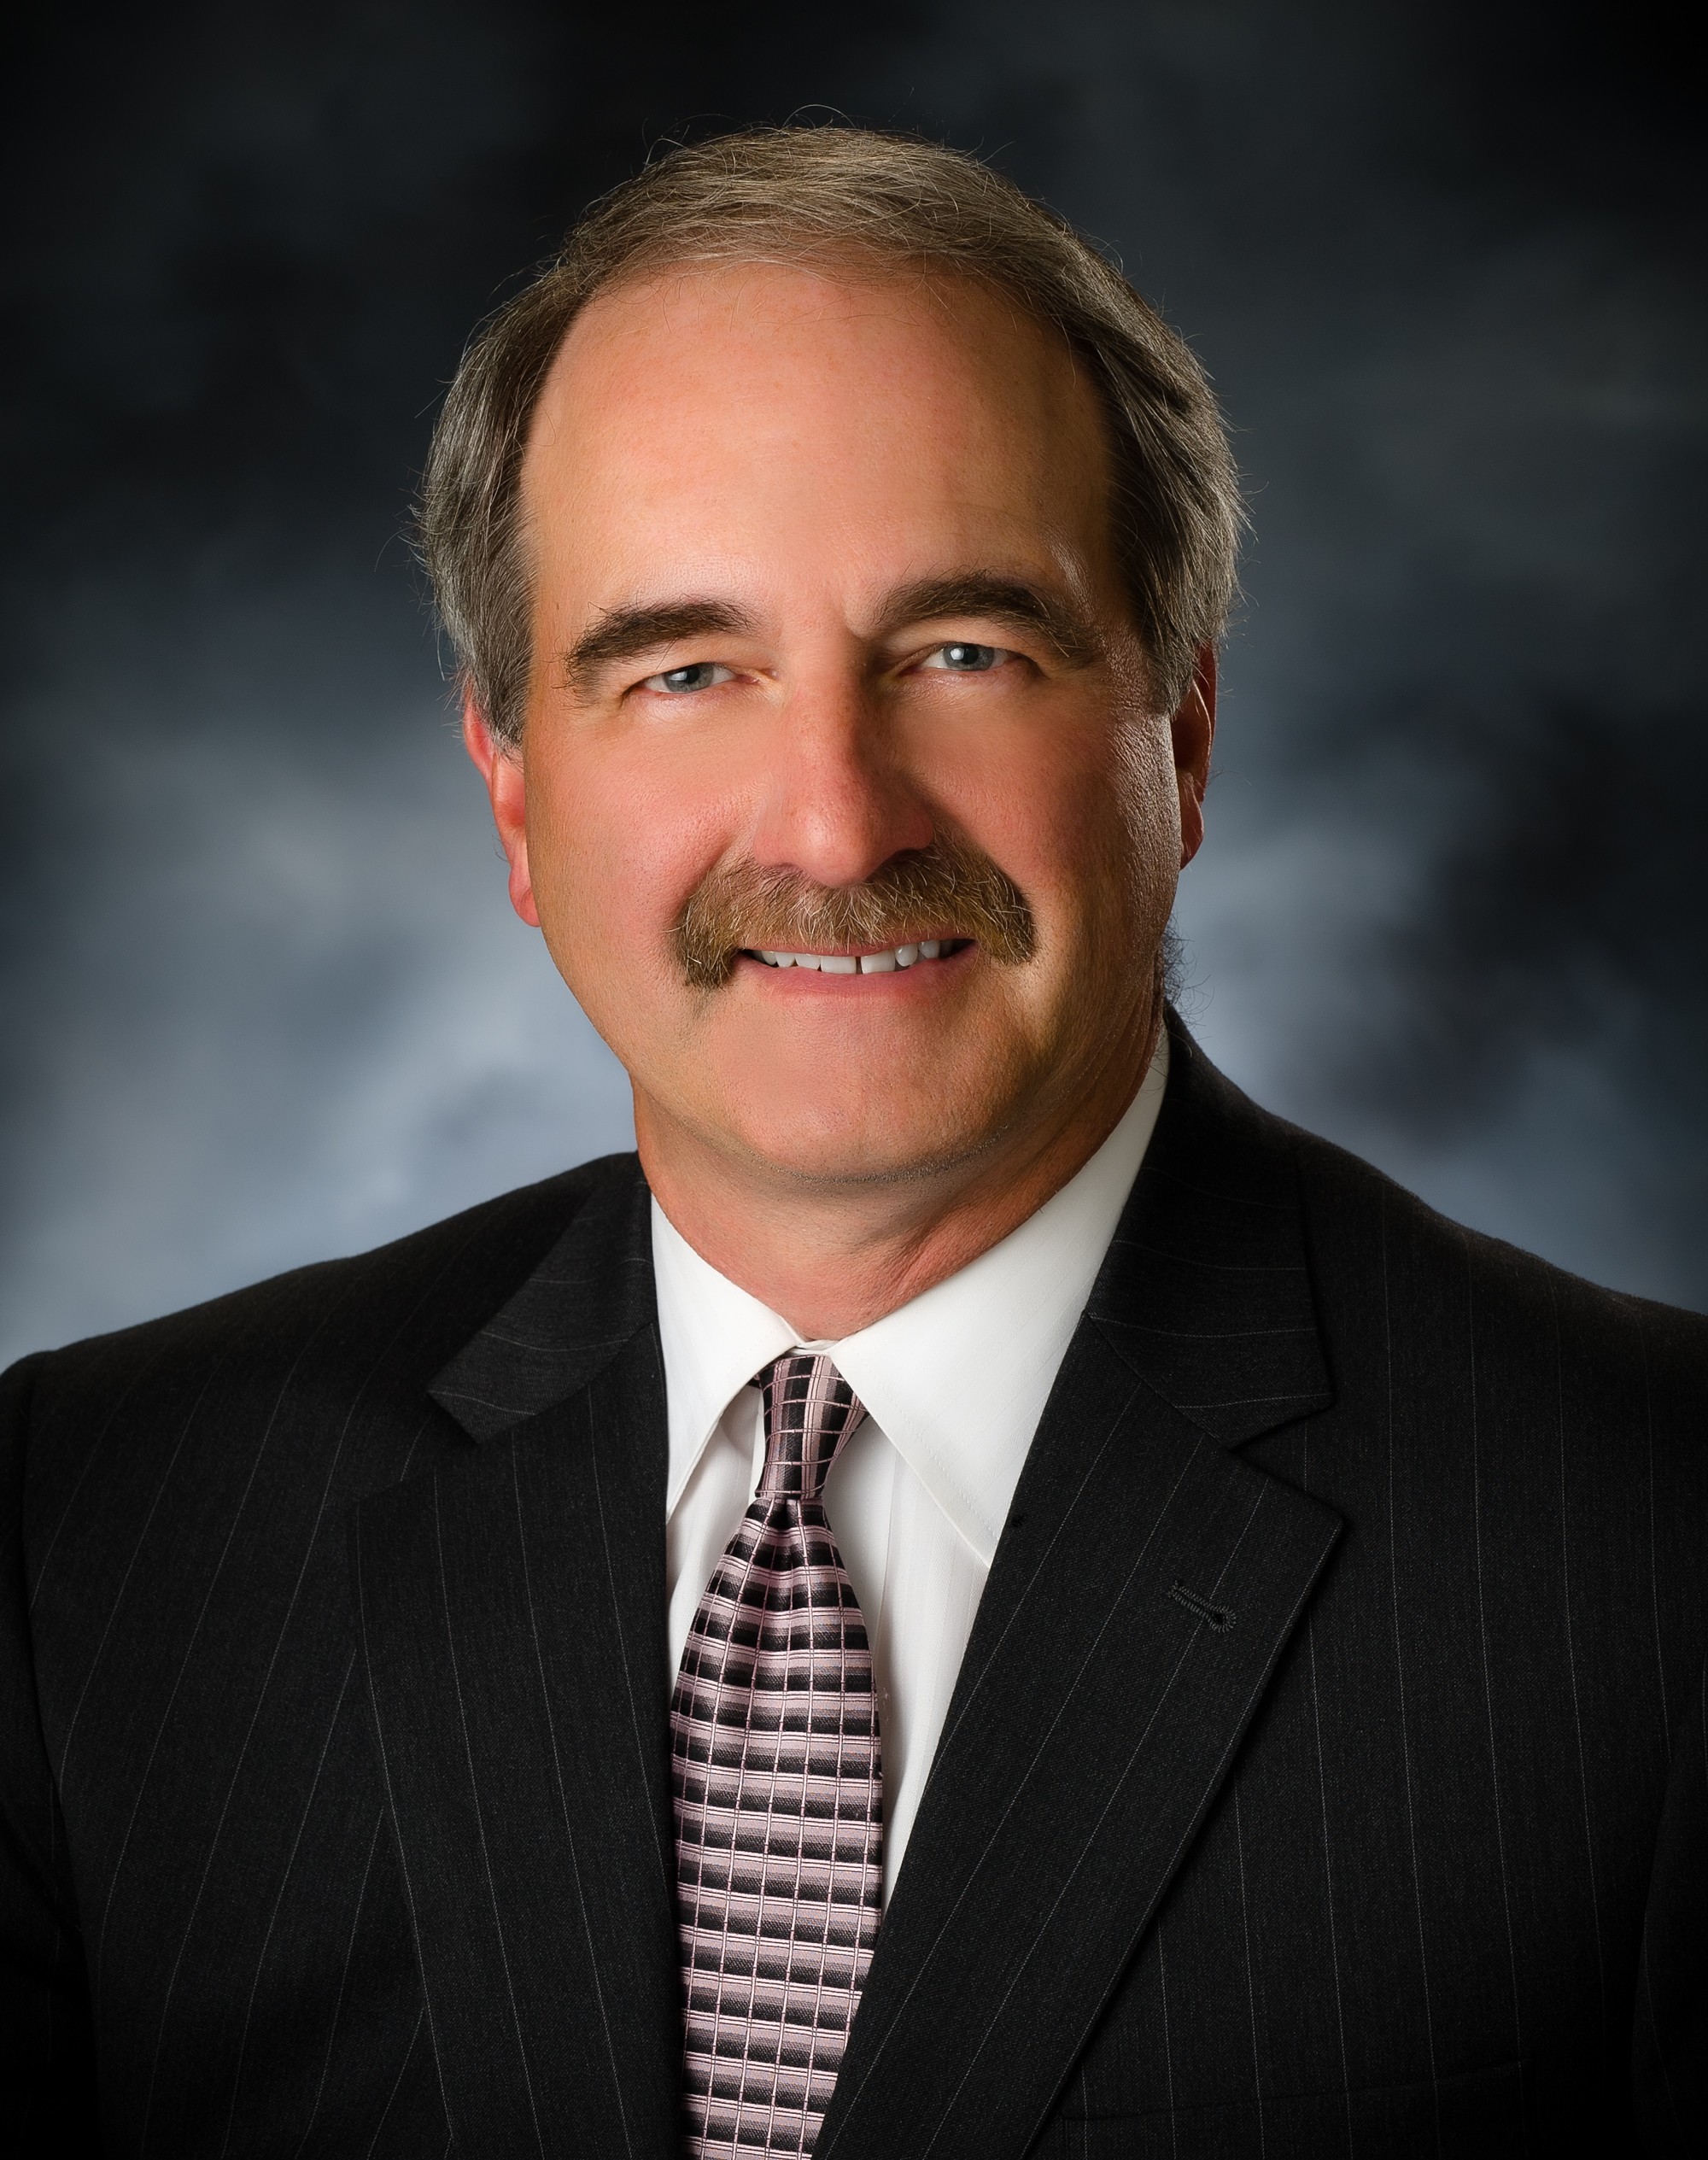 HICKORY POINT BANK ANNOUNCES APPOINTMENT OF RAY BLIEFNICK AS DEALER SERVICES REPRESENTATIVE